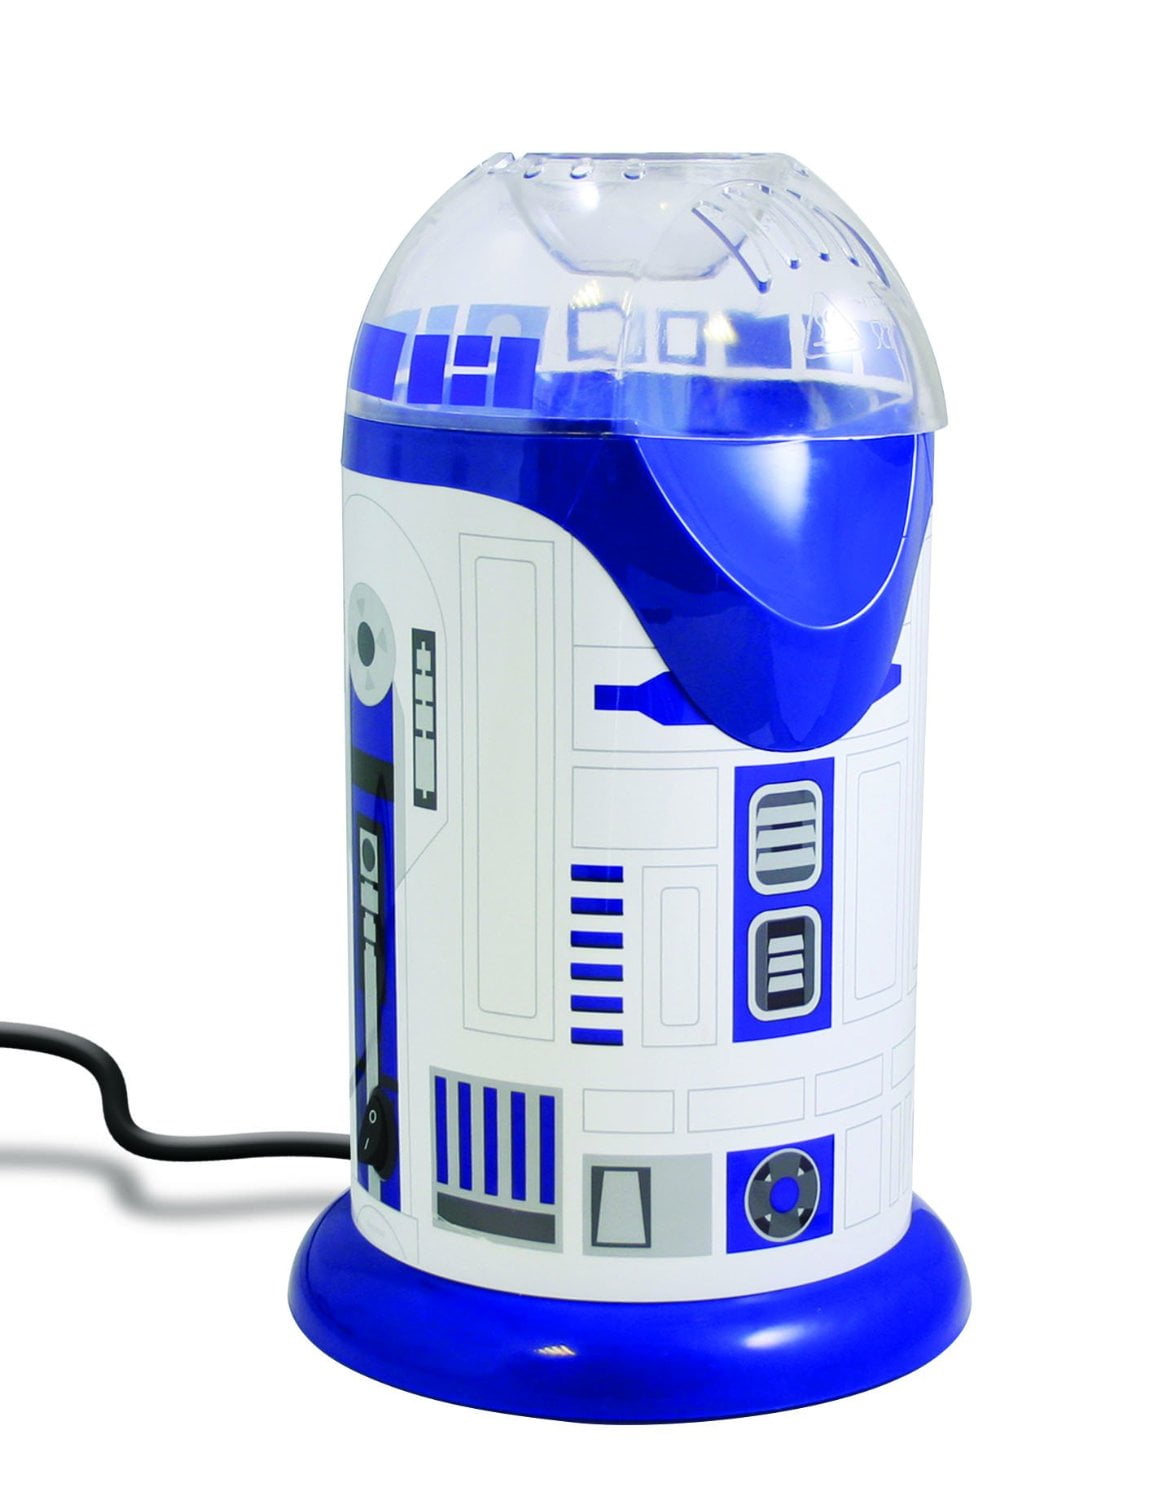 Star Wars R2D2 Popcorn Maker  Urban Outfitters Japan - Clothing, Music,  Home & Accessories